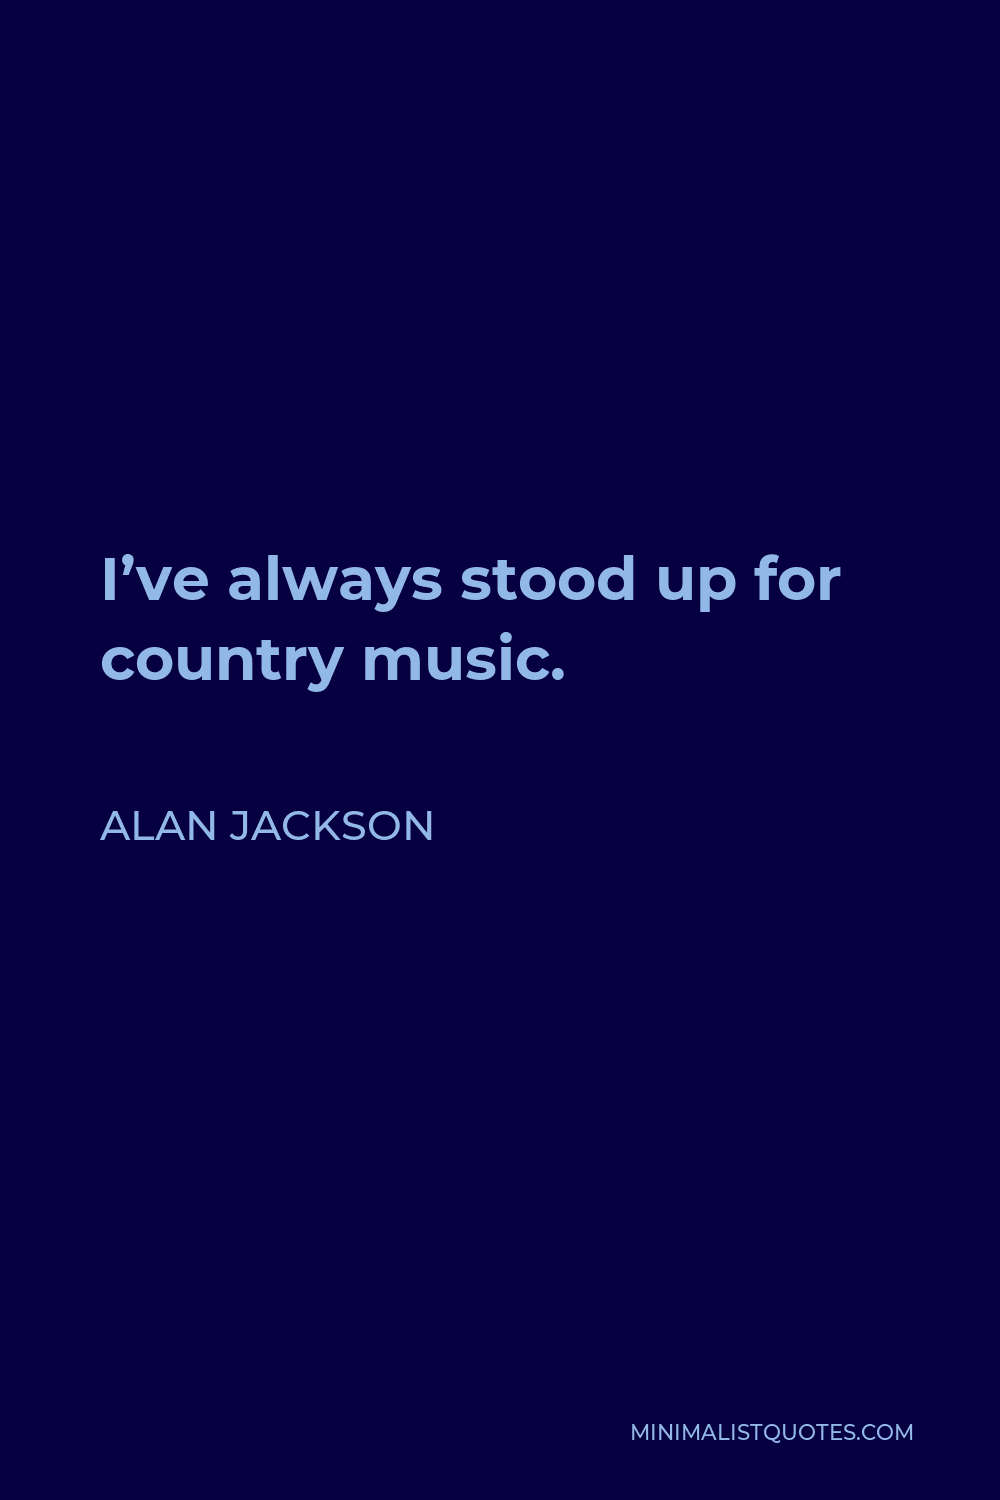 Alan Jackson Quote - I’ve always stood up for country music.